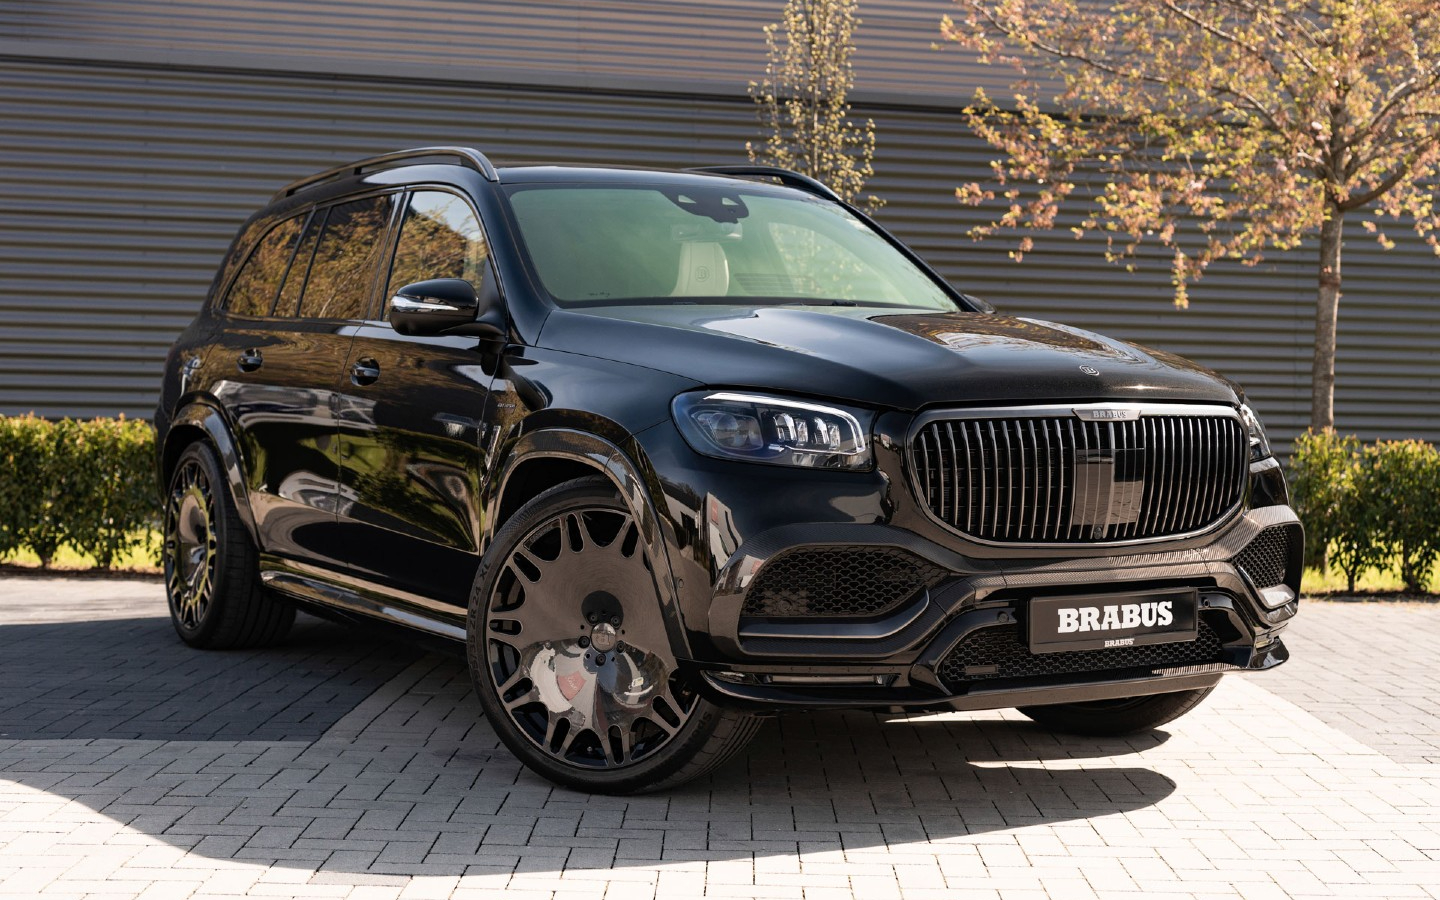 Brabus has released a 900-horsepower version of the crossover Maybach GLS